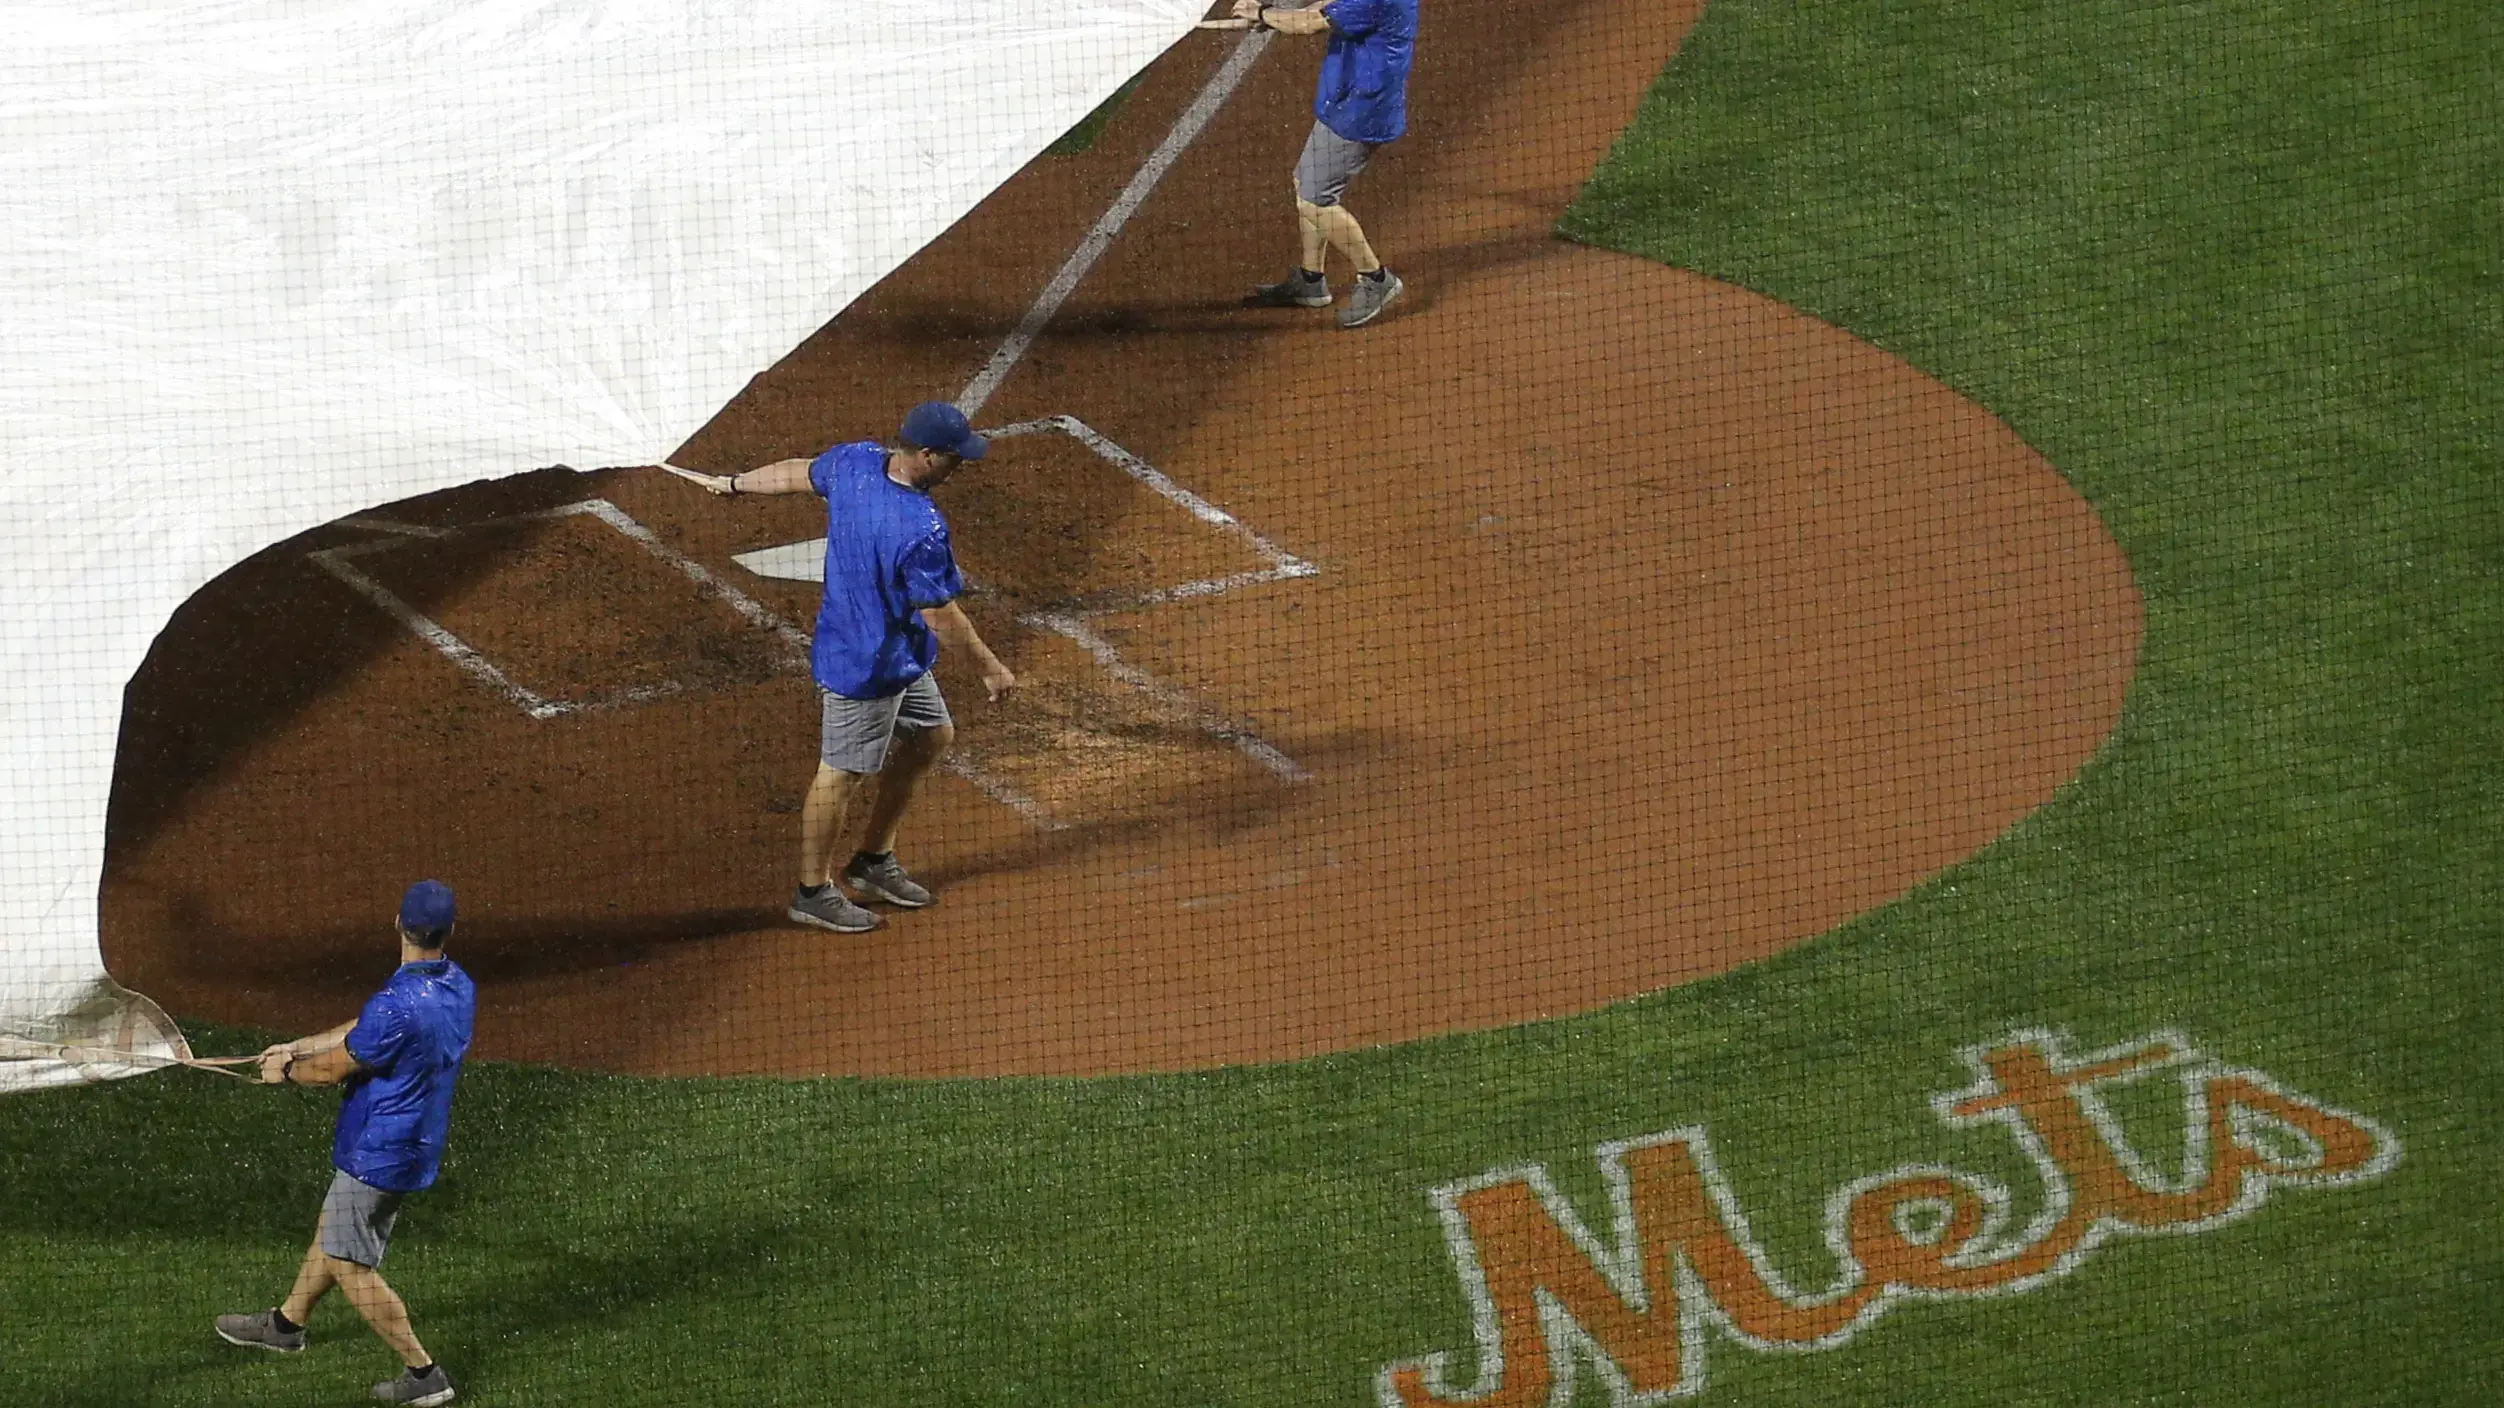 Aug 10, 2021; New York City, New York, USA; Members of the grounds crew roll the tarp onto the infield during a thunderstorm in the second inning of a game between the New York Mets and the Washington Nationals at Citi Field. / Brad Penner-USA TODAY Sports